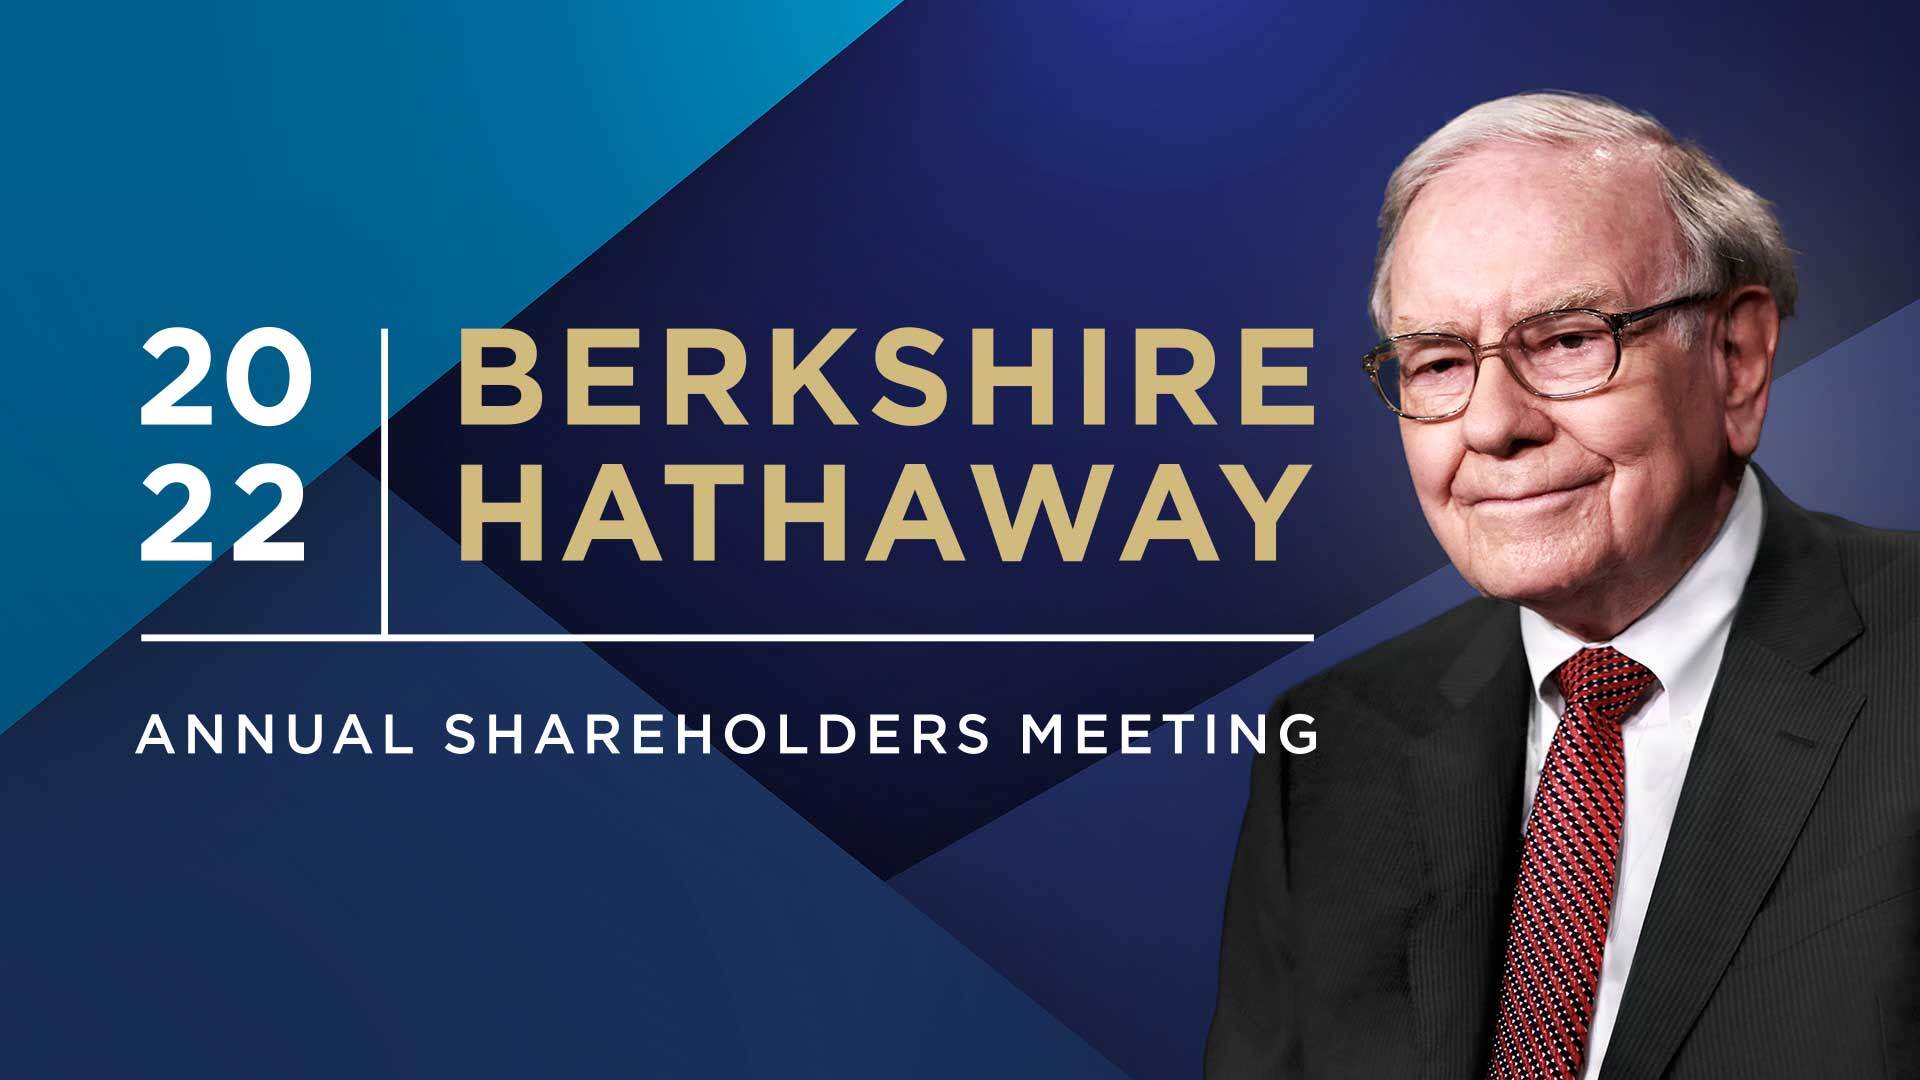 Reflections from 2022 Berkshire Hathaway Annual Shareholders’ meeting